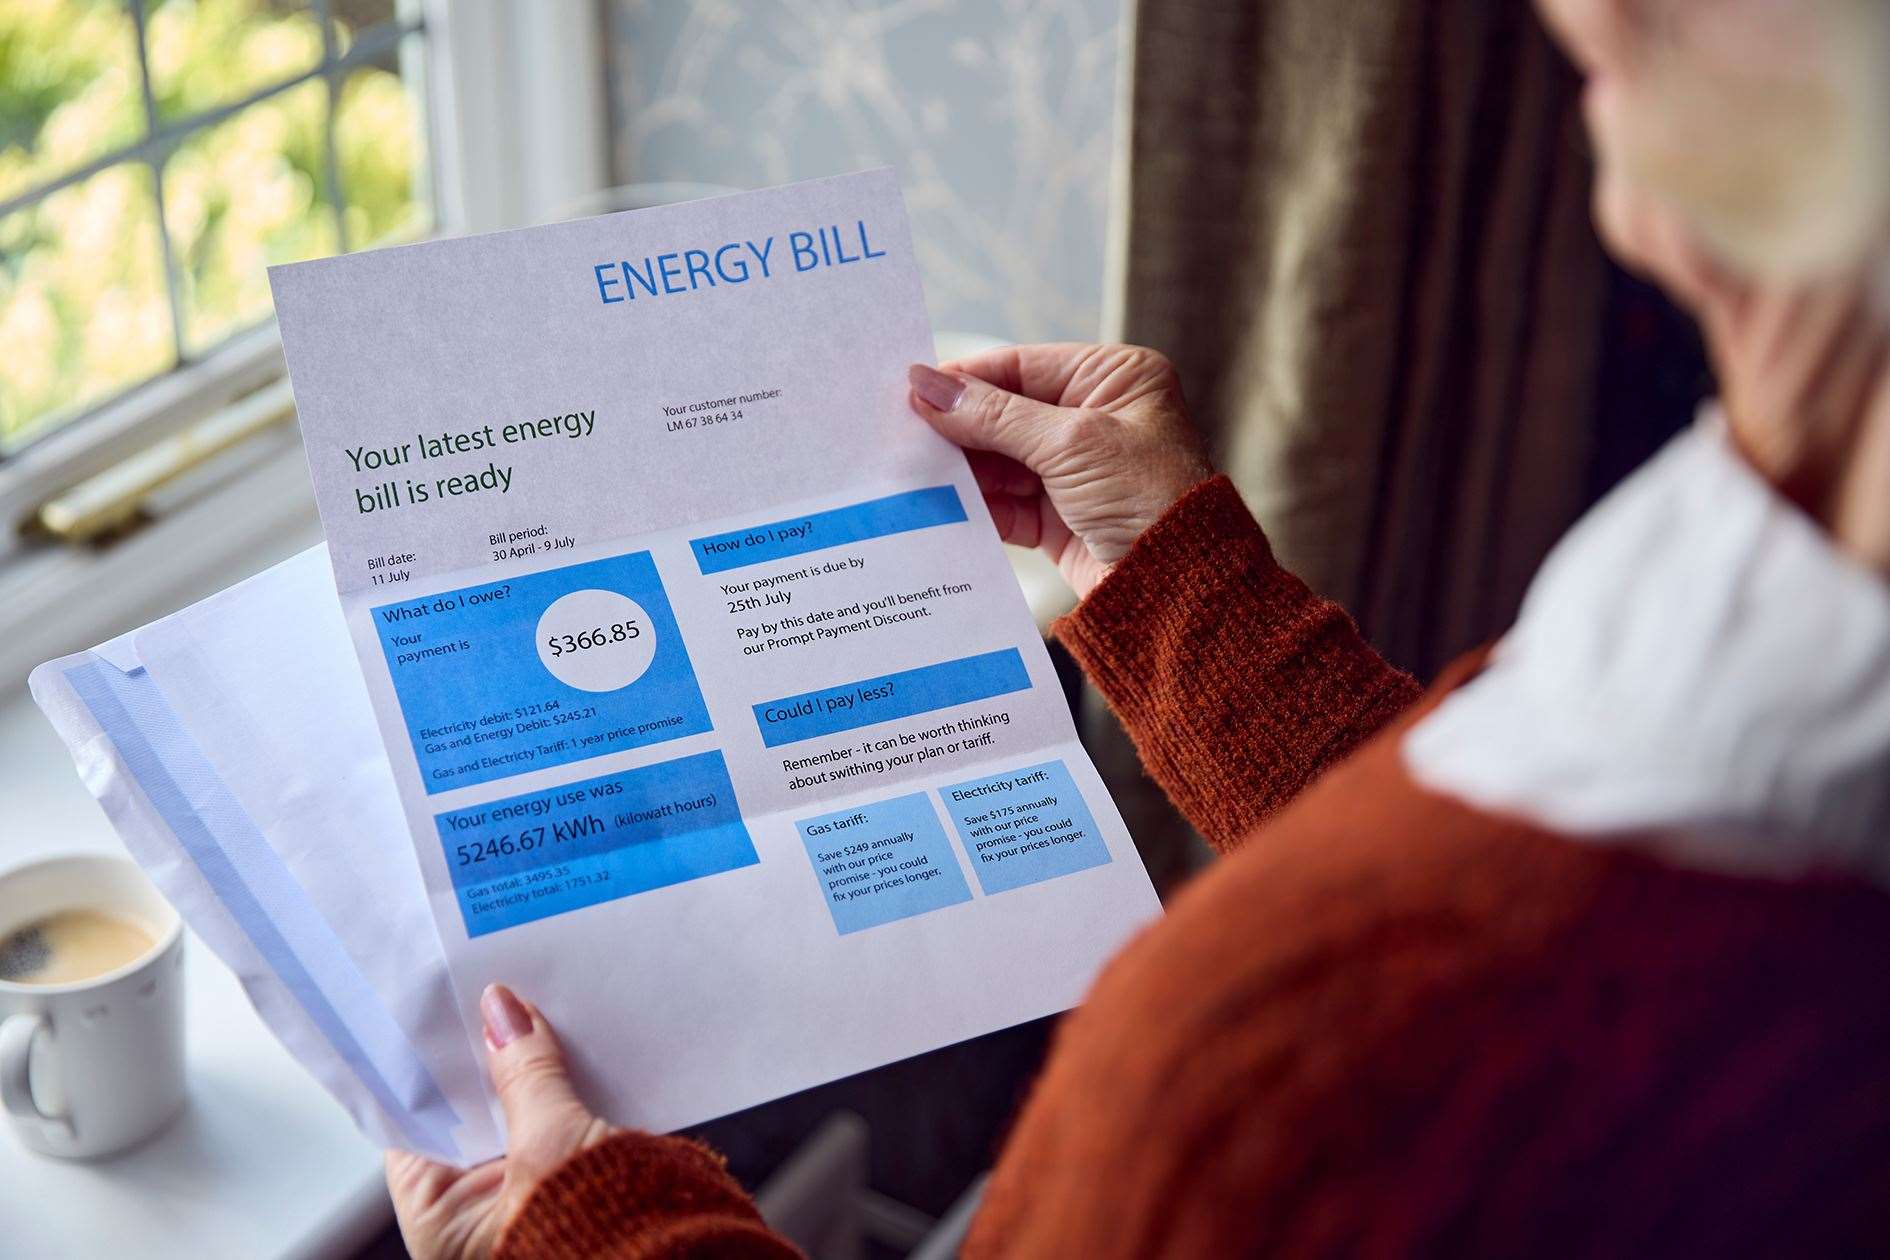 North-east people have been struggling with their energy bills.